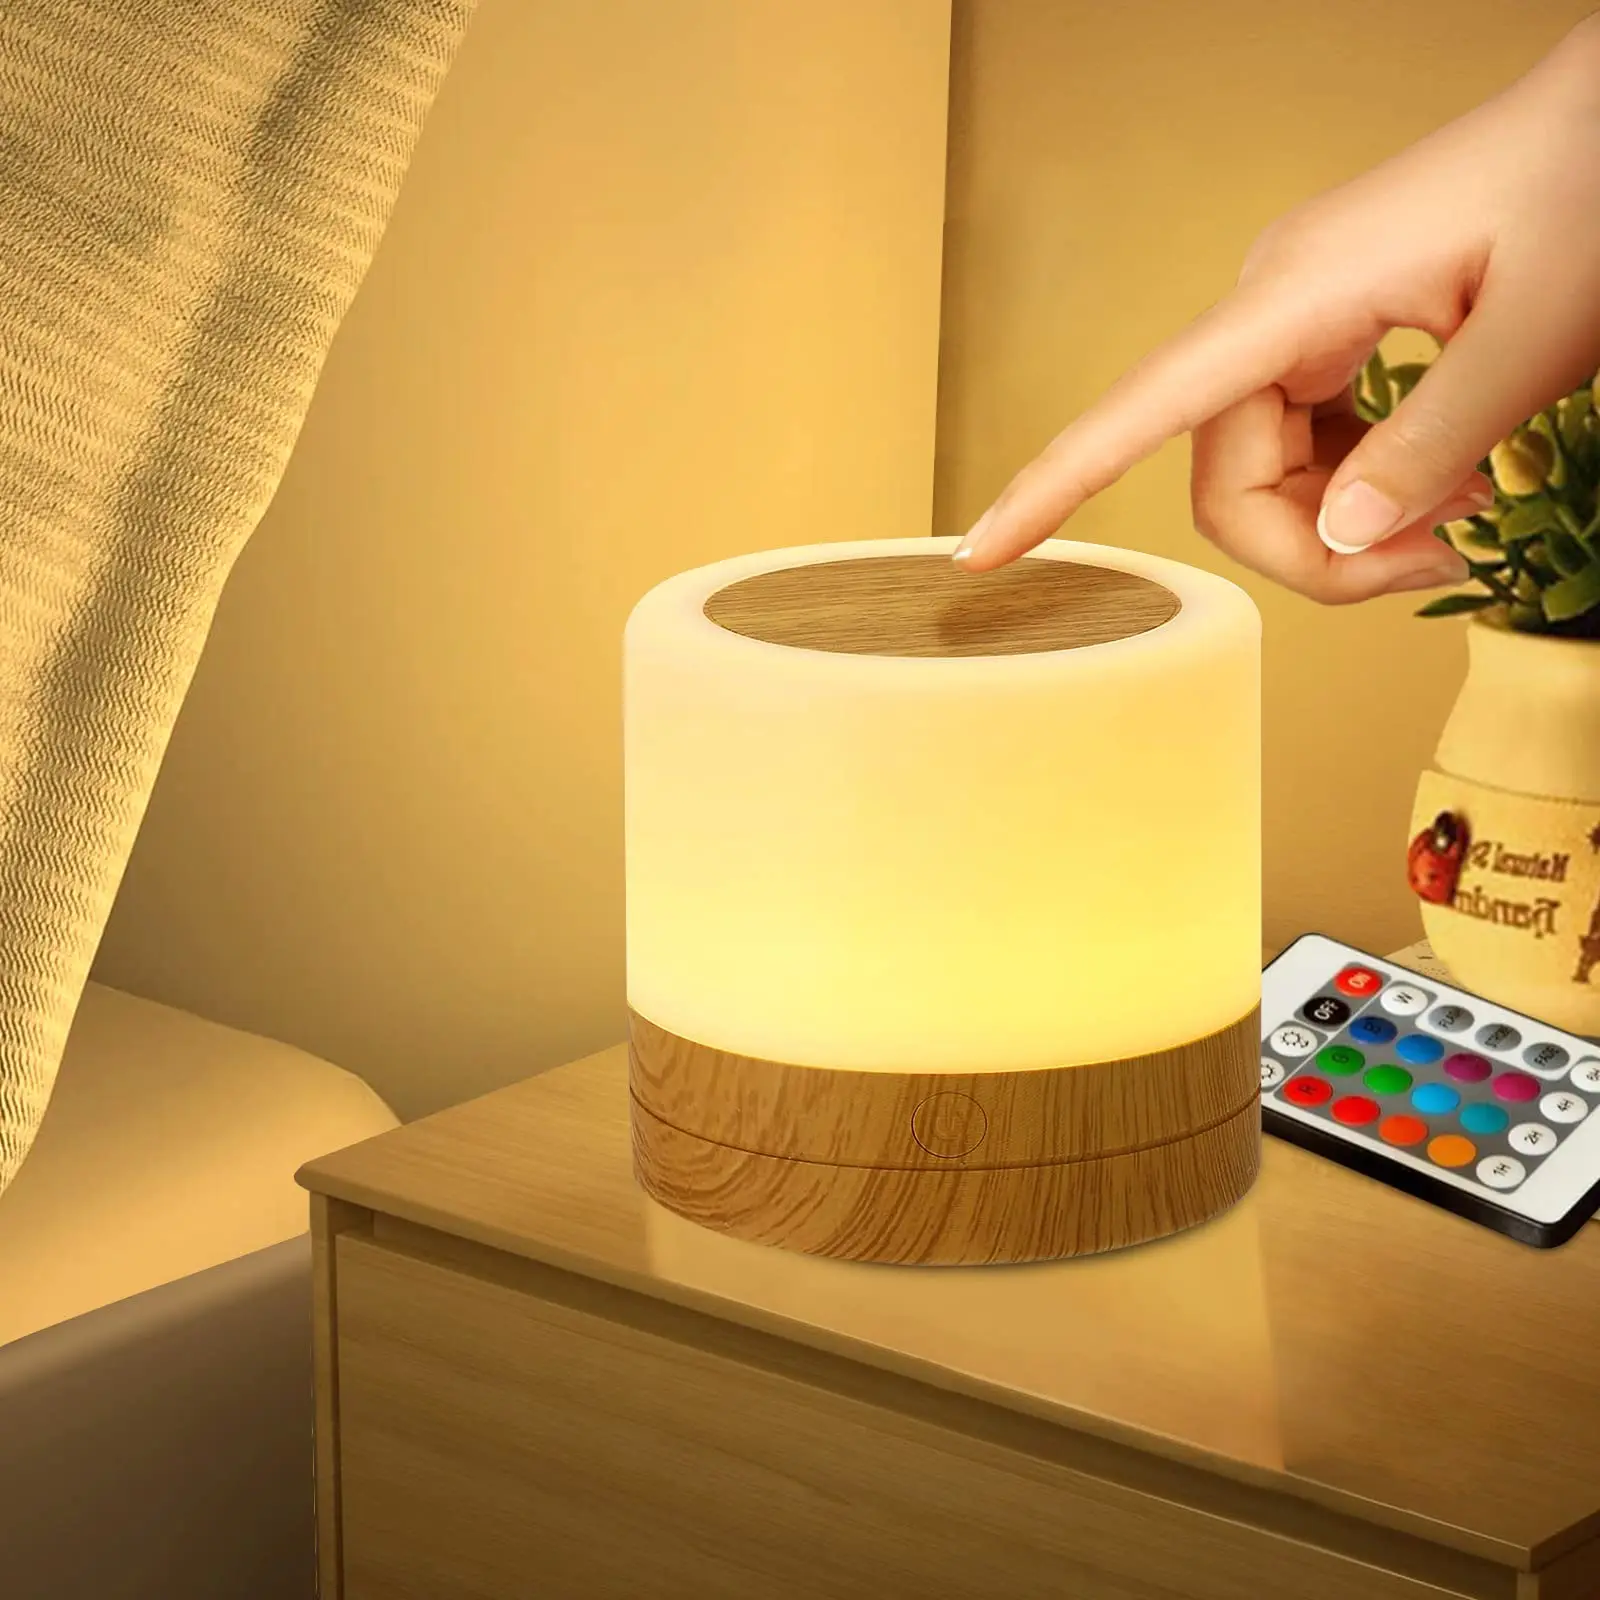 Taipow Touch Table Lamp, Rechargeable LED Night Light W Remote Control Color Change and Timer -wood, White